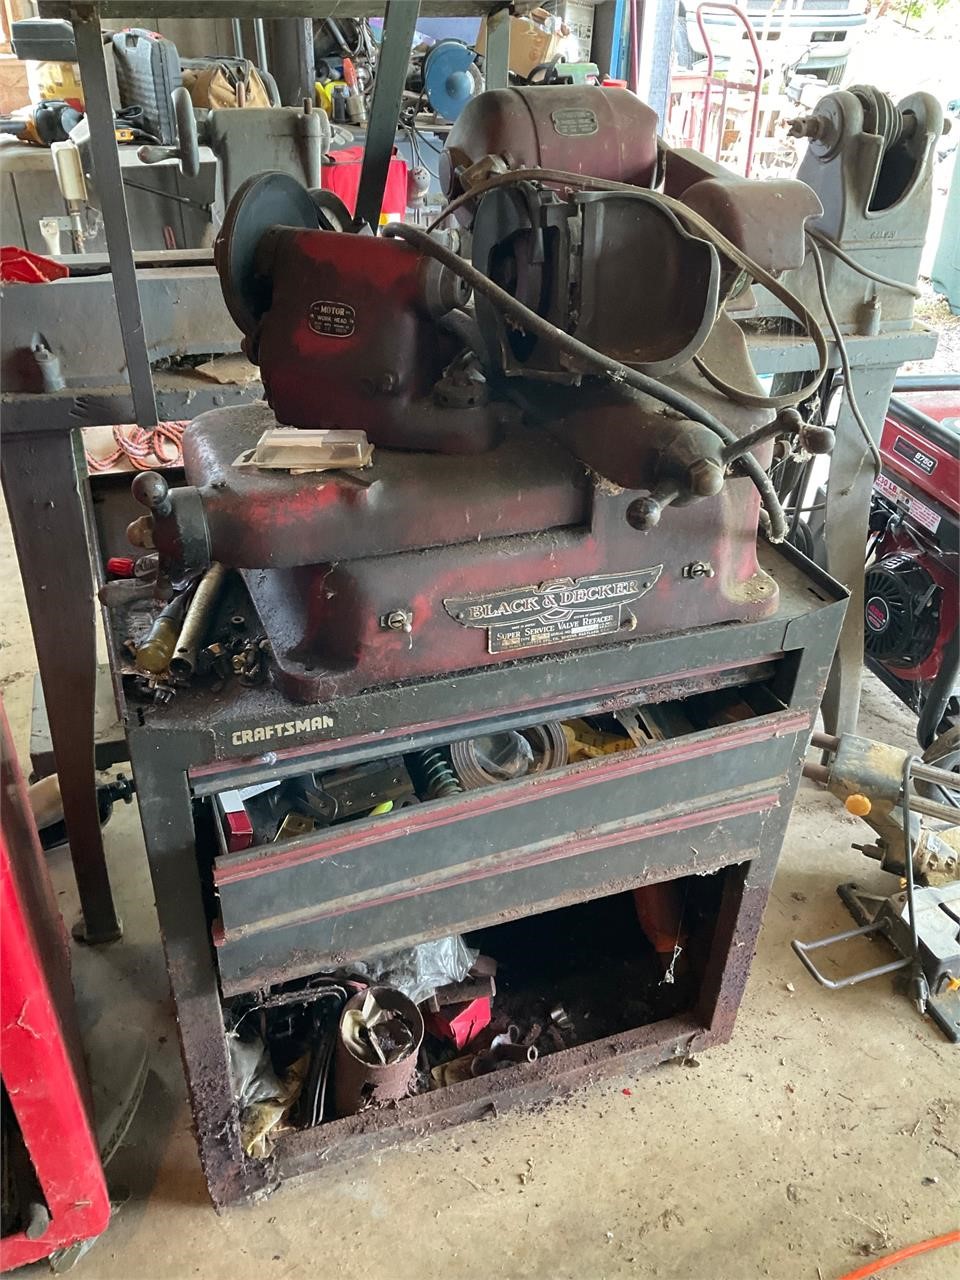 Valve grinder and tool box